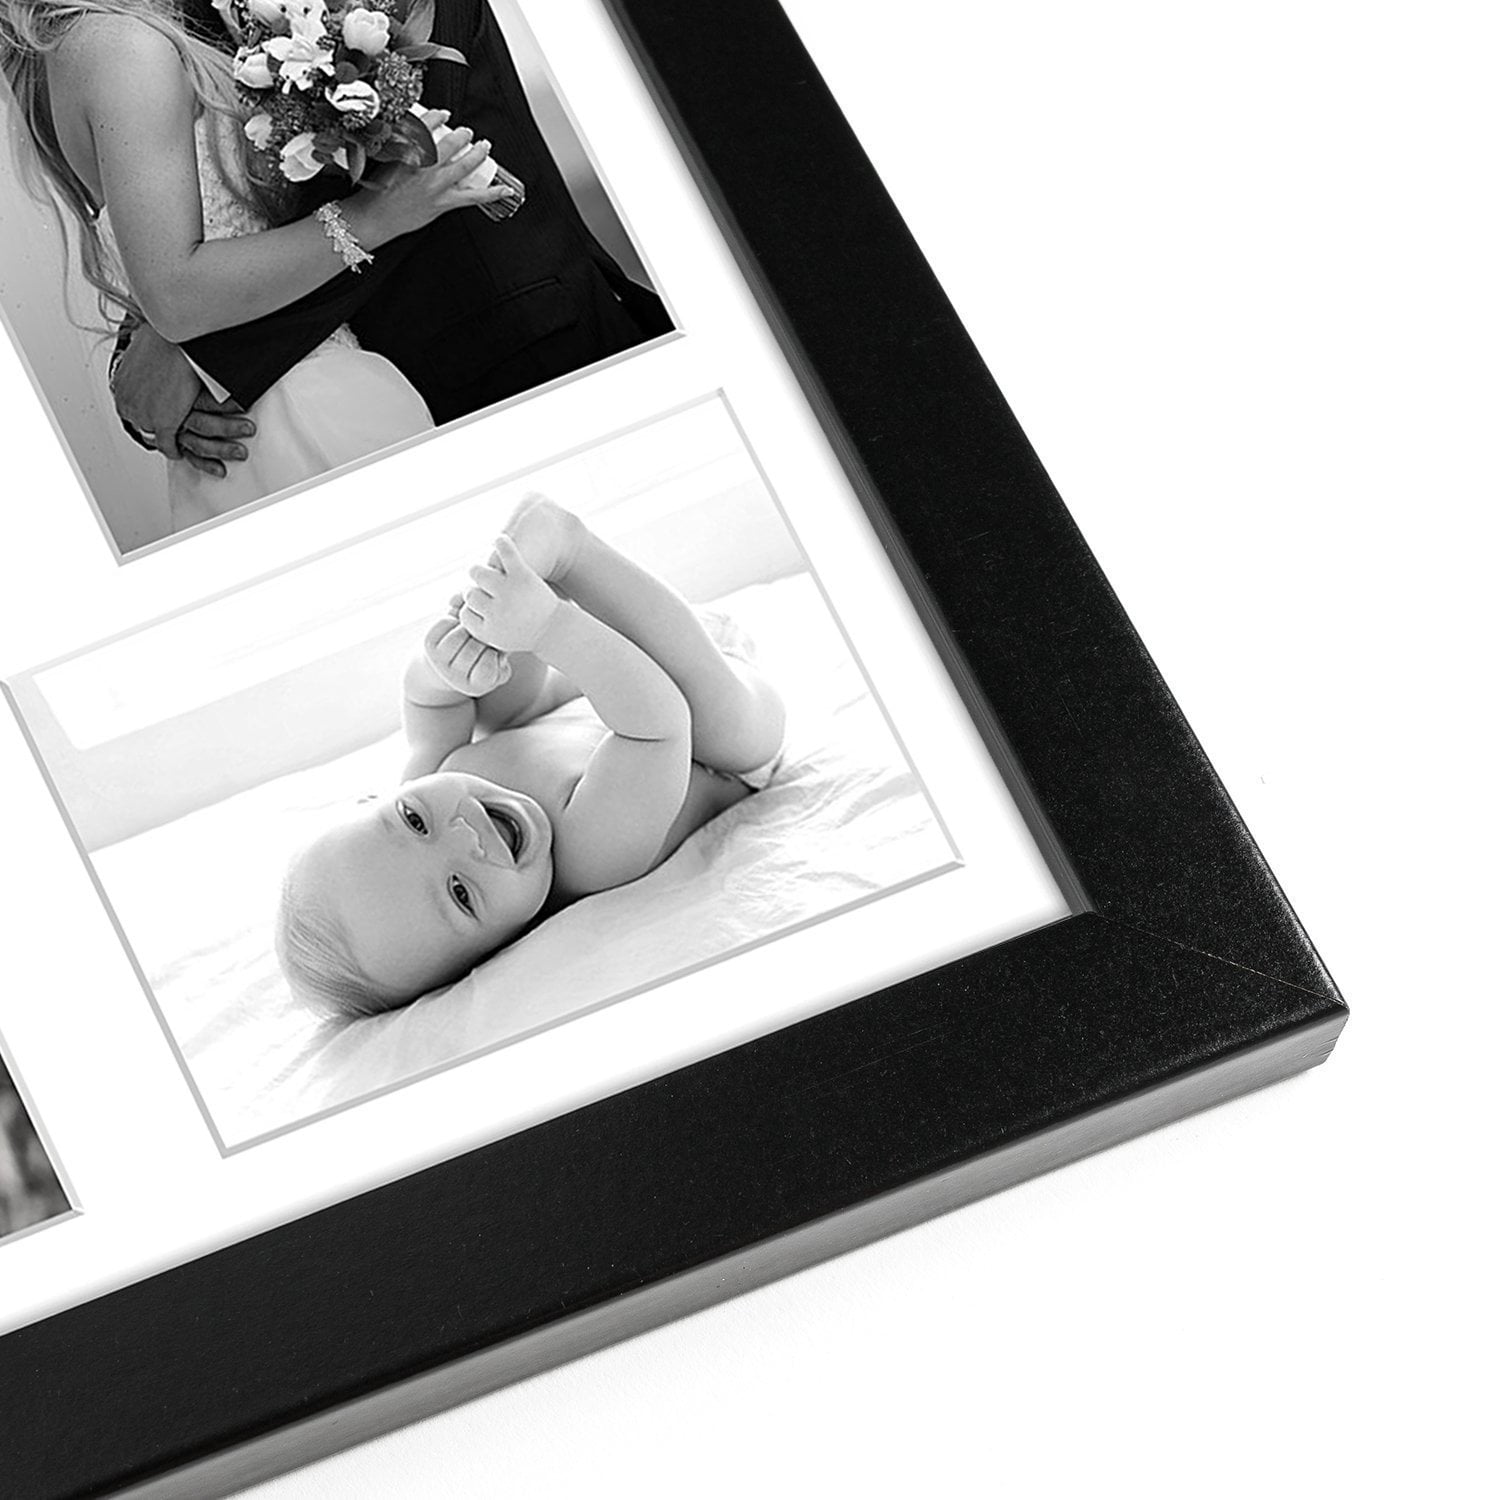 12x12 Wood Picture Frame White Mat for Four 4x6 Photos Square Collage Black